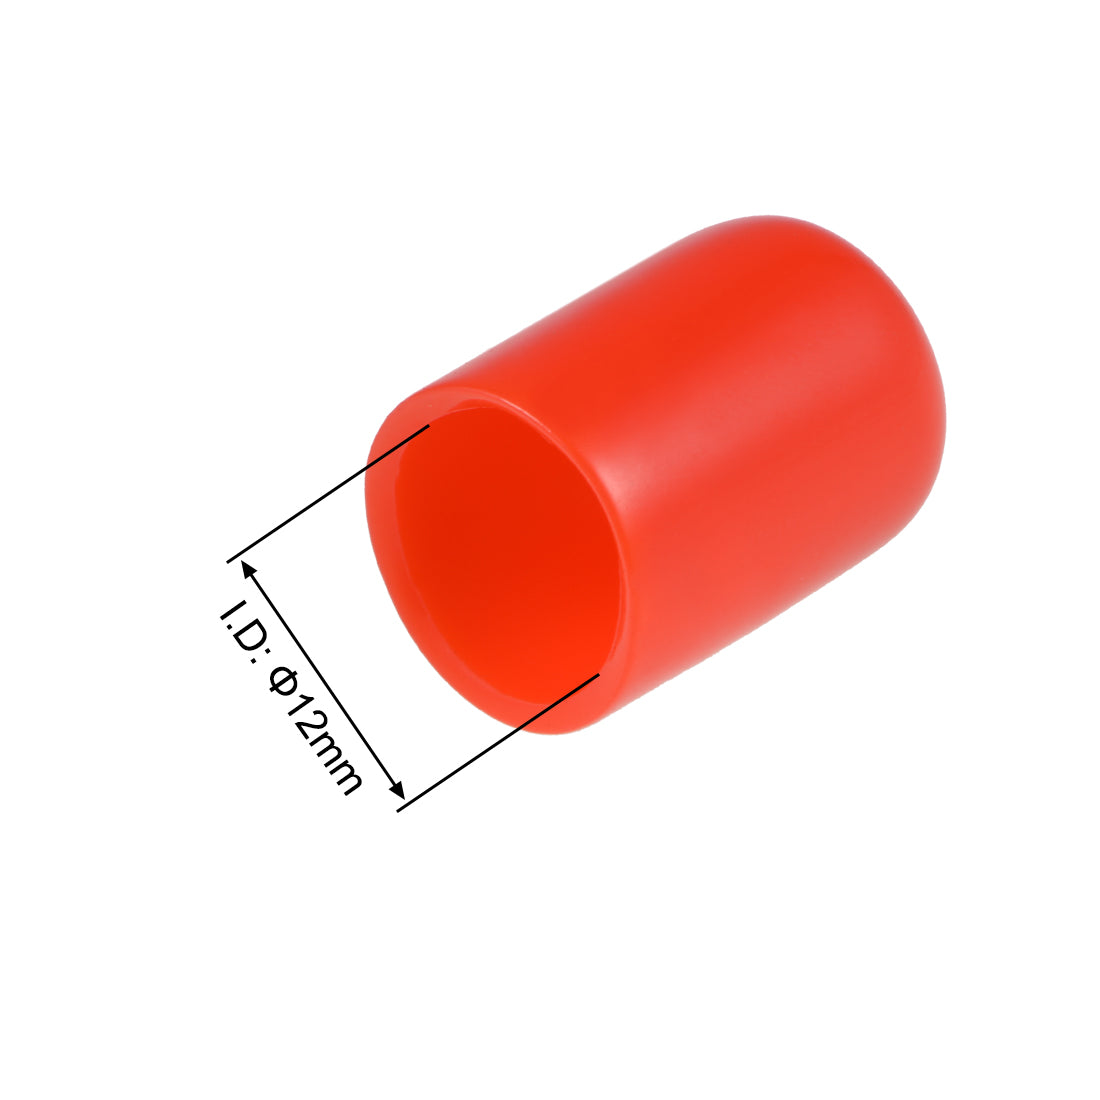 uxcell Uxcell 80pcs Rubber End Caps 12mm ID 20mm Height Screw Thread Protectors Red